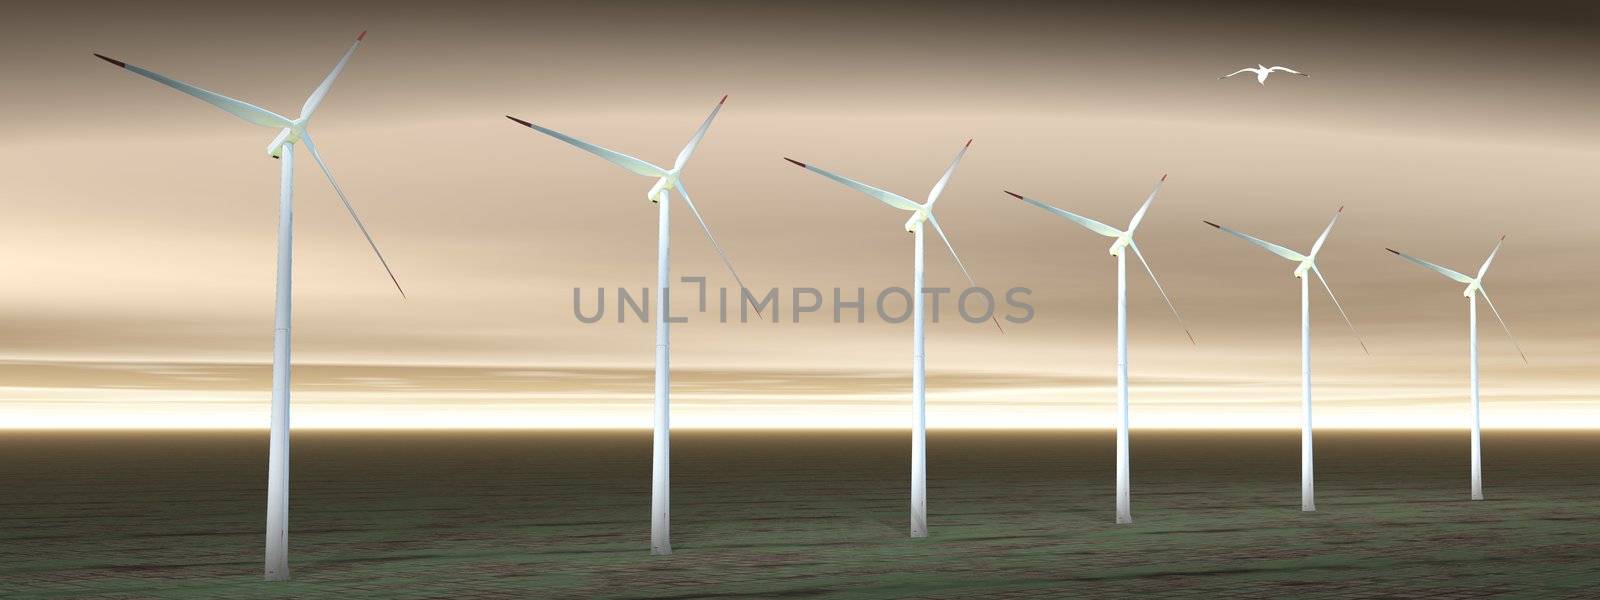 Bird flying upon wind turbines on in a cloudy sky